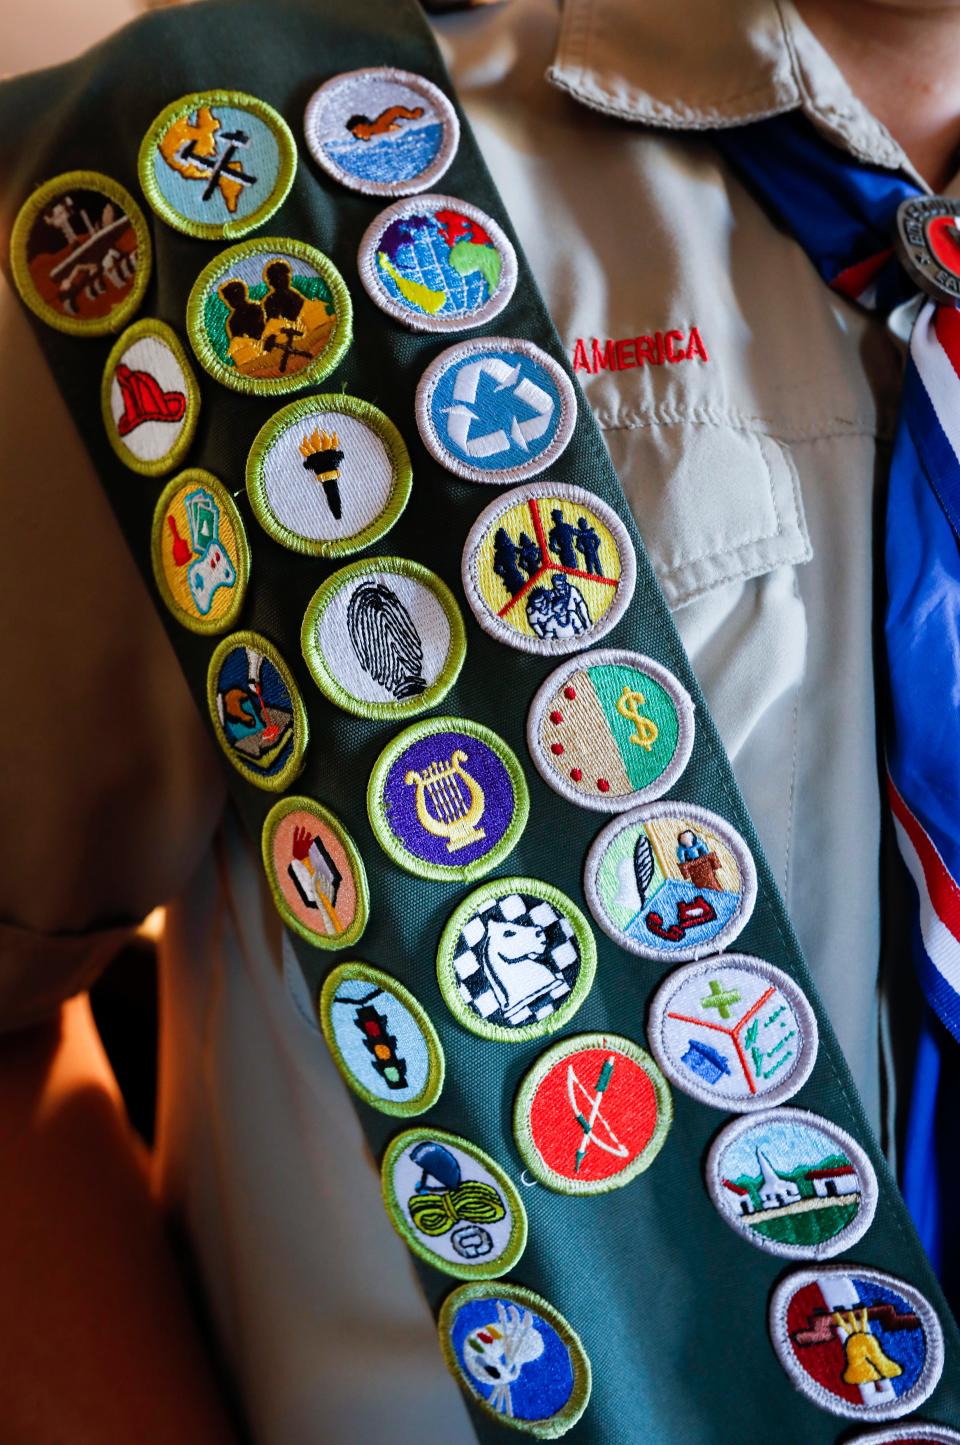 Several of the more than 30 merit badges Hunter Odom earned on his way to become an Eagle Scout.